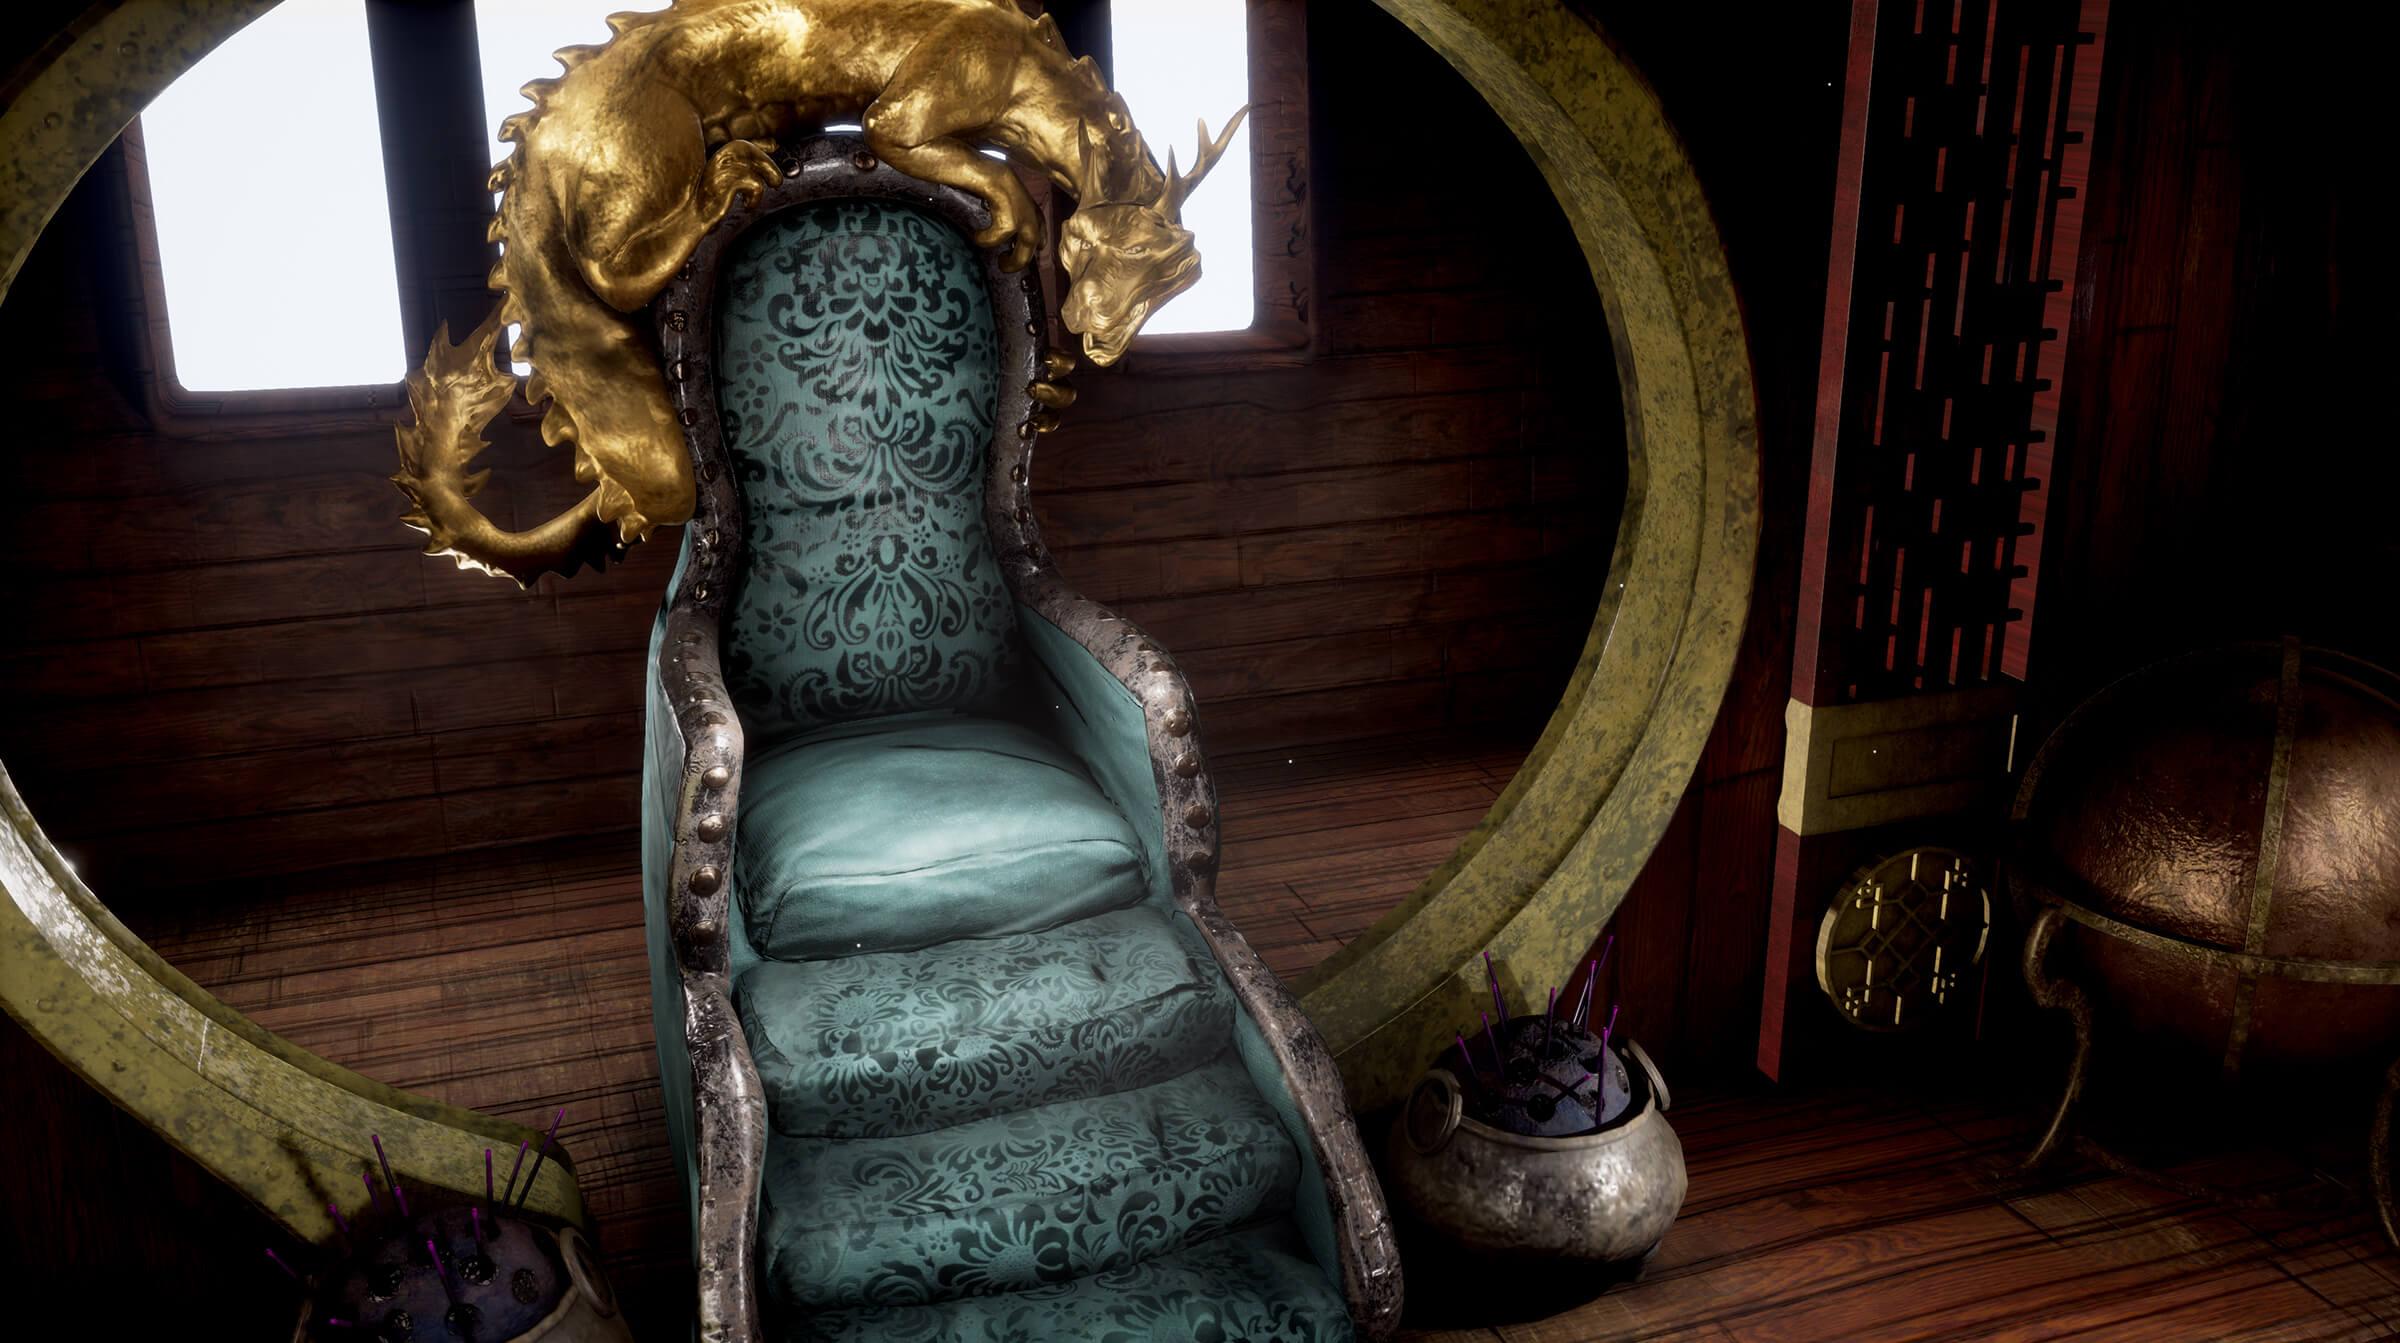 An upholstered throne with a dragon sculpture perched on top